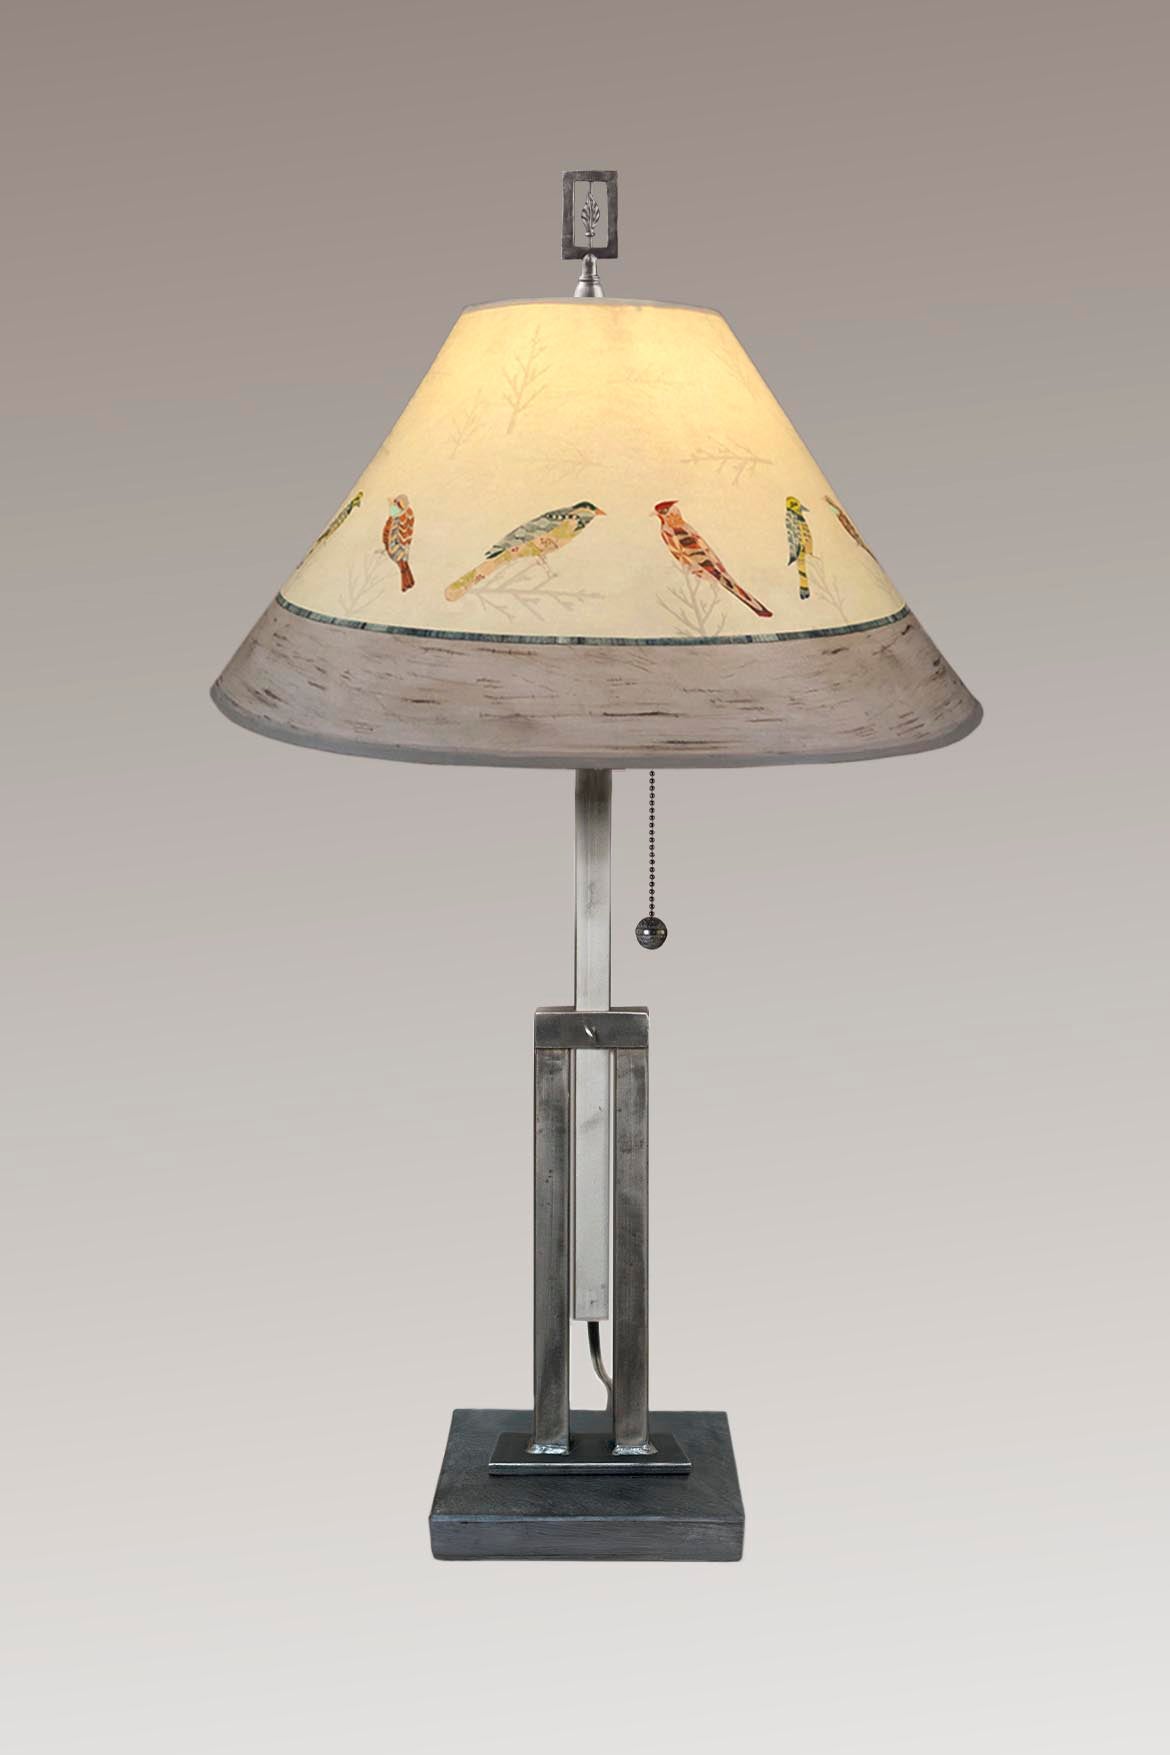 Janna Ugone &amp; Co Table Lamps Adjustable-Height Steel Table Lamp with Large Conical Shade in Bird Friends